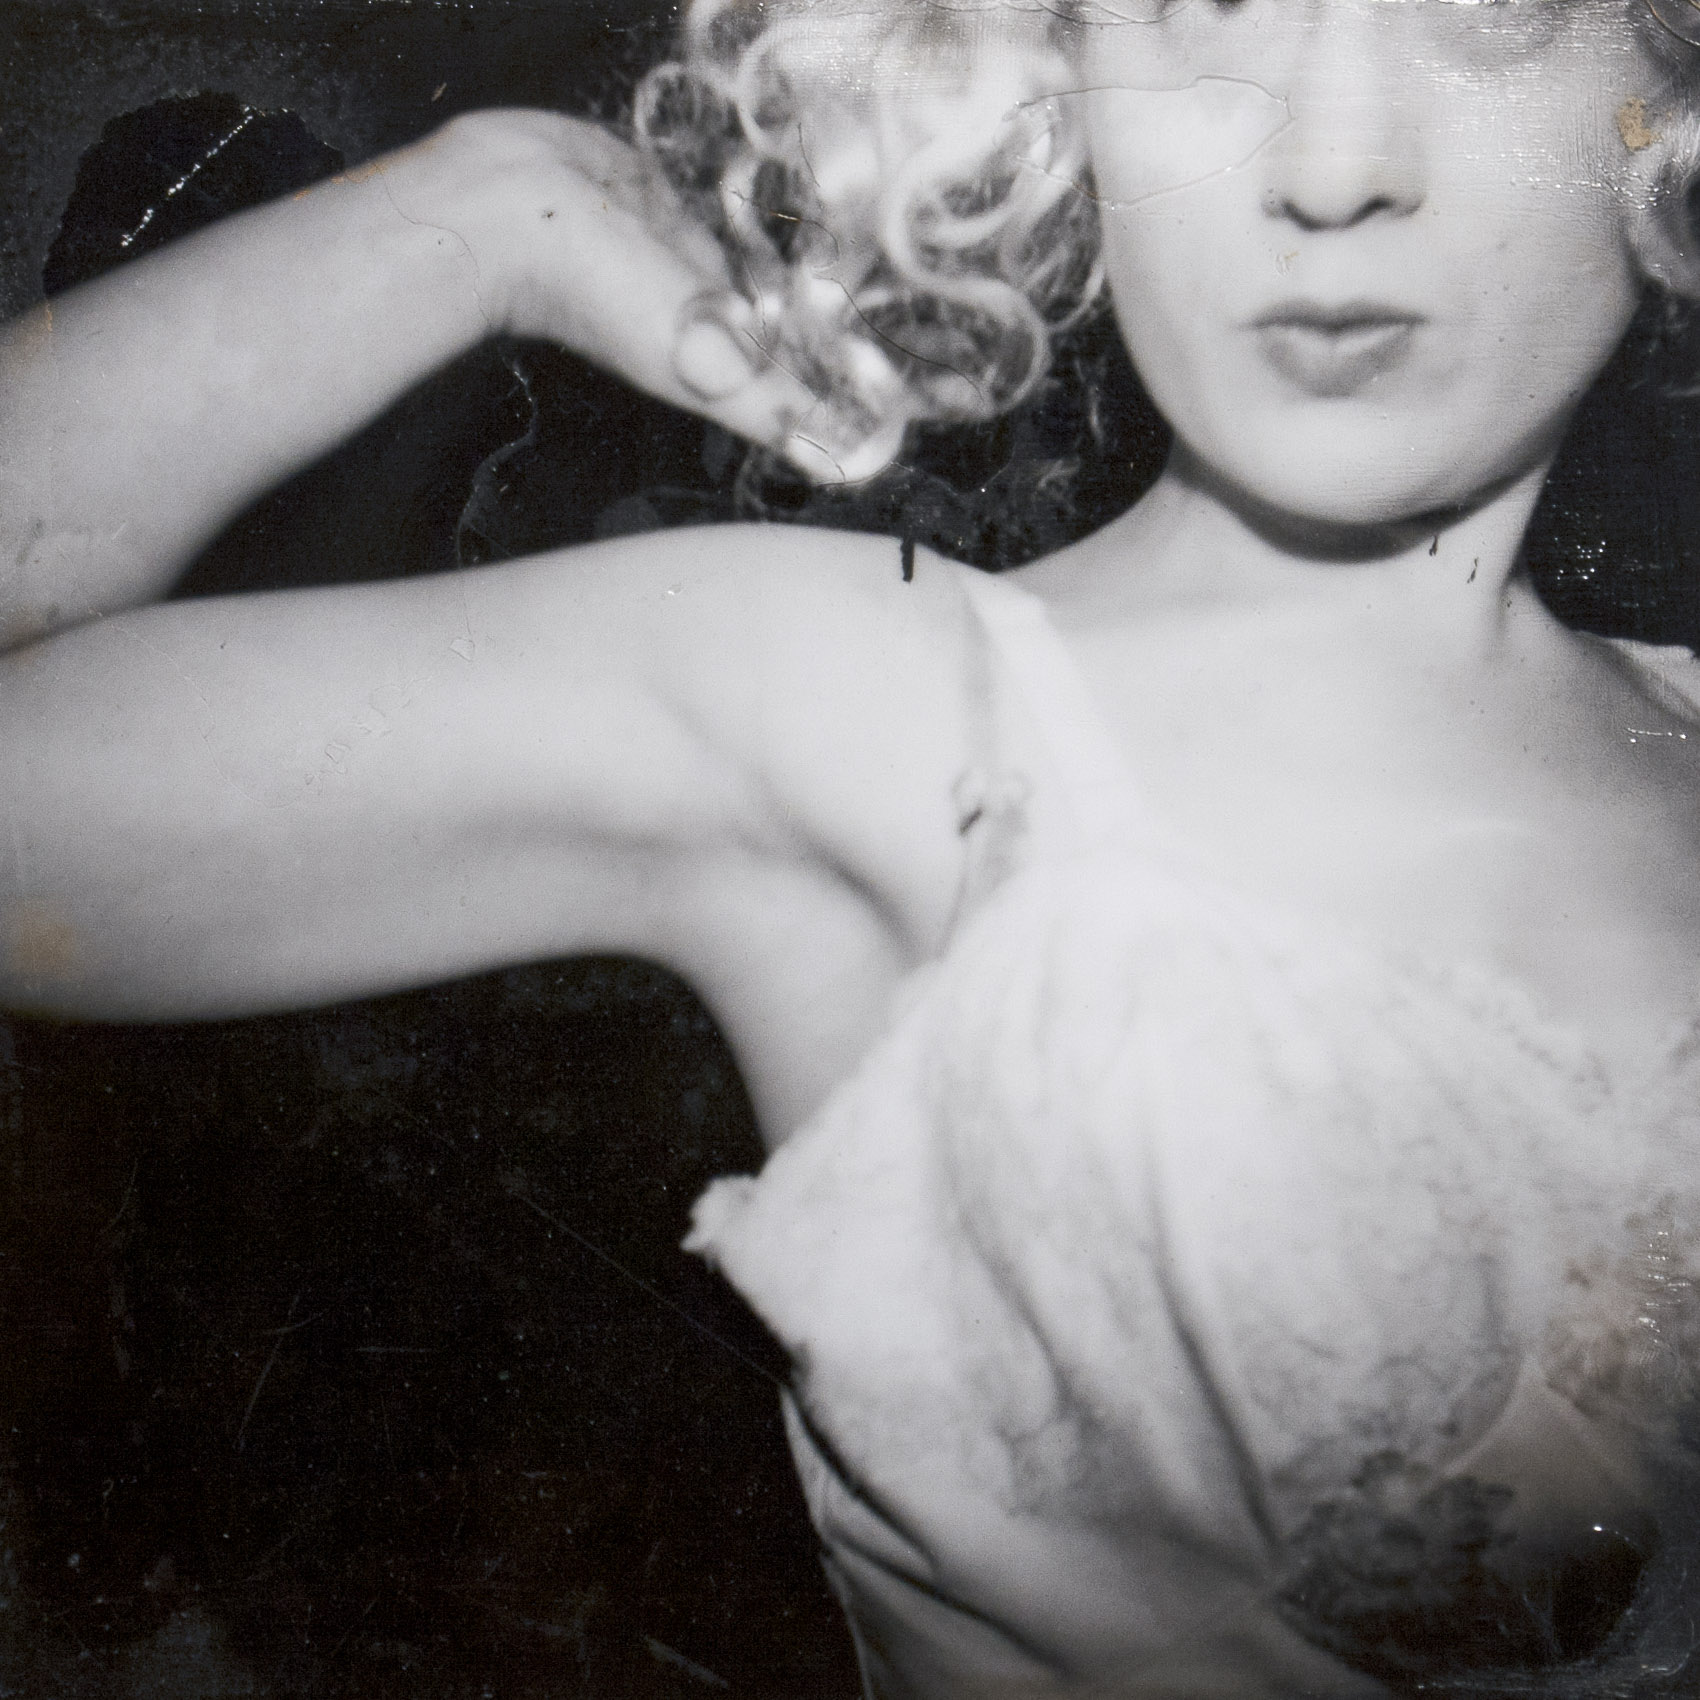 Johanna In Her Blonde Wig (after a night of working at the New York Post) v.1 from the series The Metropolitan Girls, 